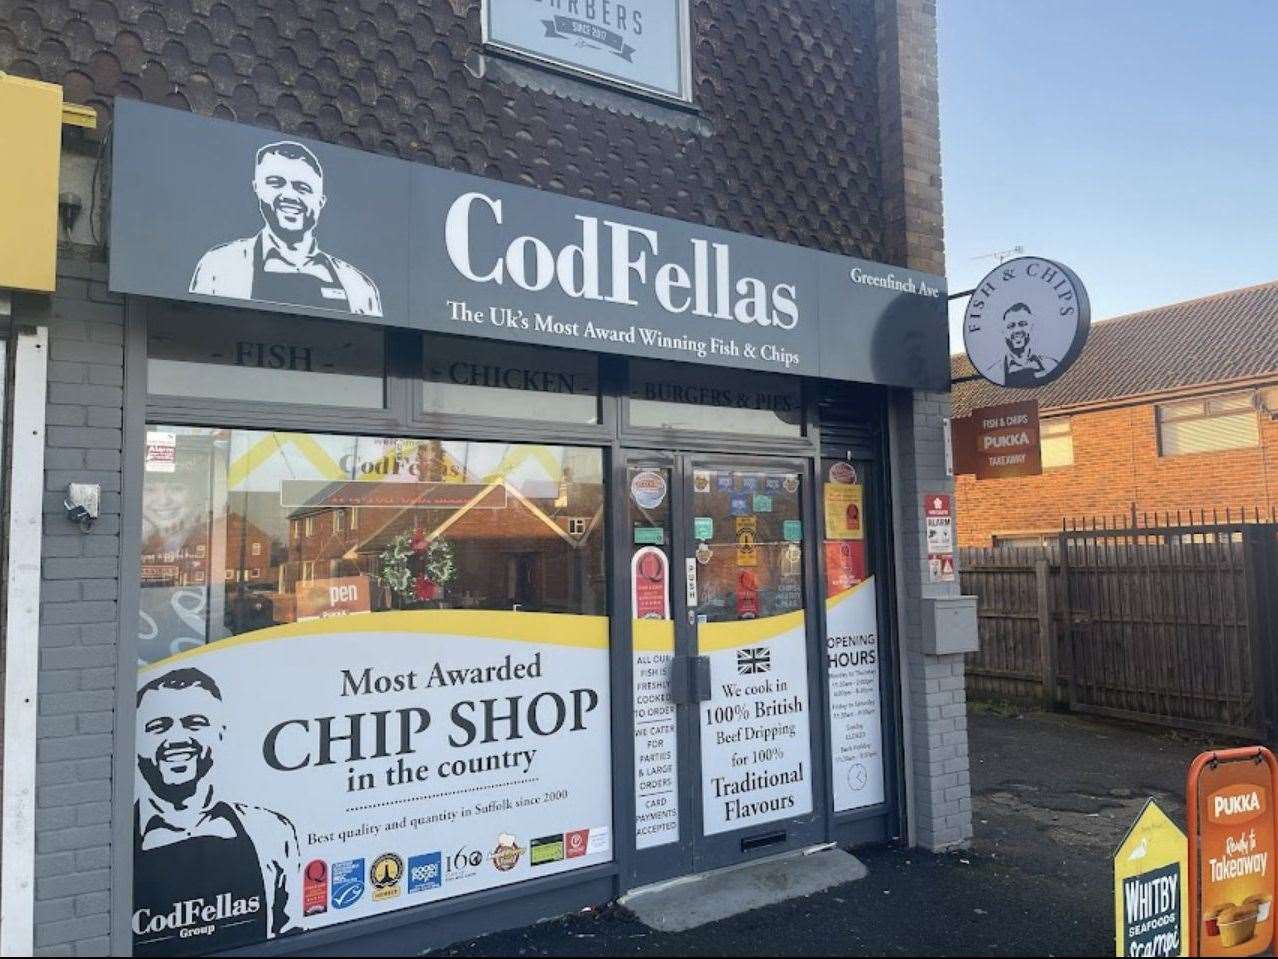 CodFellas is located in Greenfinch Avenue. Picture: Ozzie Bozdag